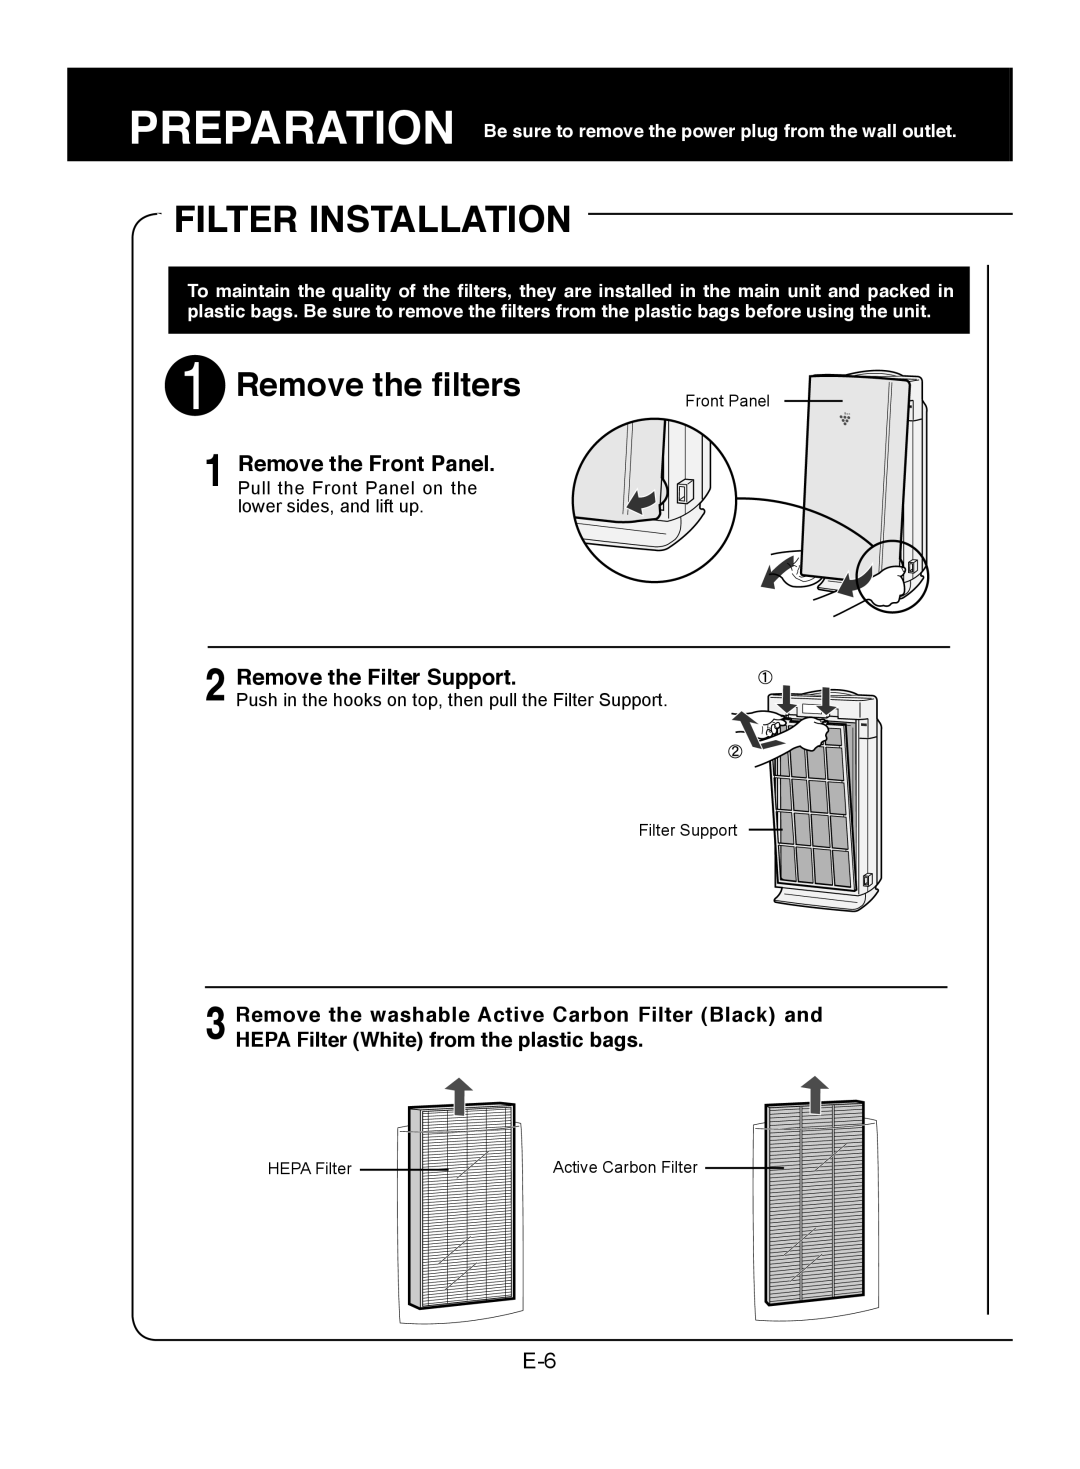 Sharp FU-W53J operation manual Filter Installation, Remove the filters, Remove the Front Panel, Remove the Filter Support 